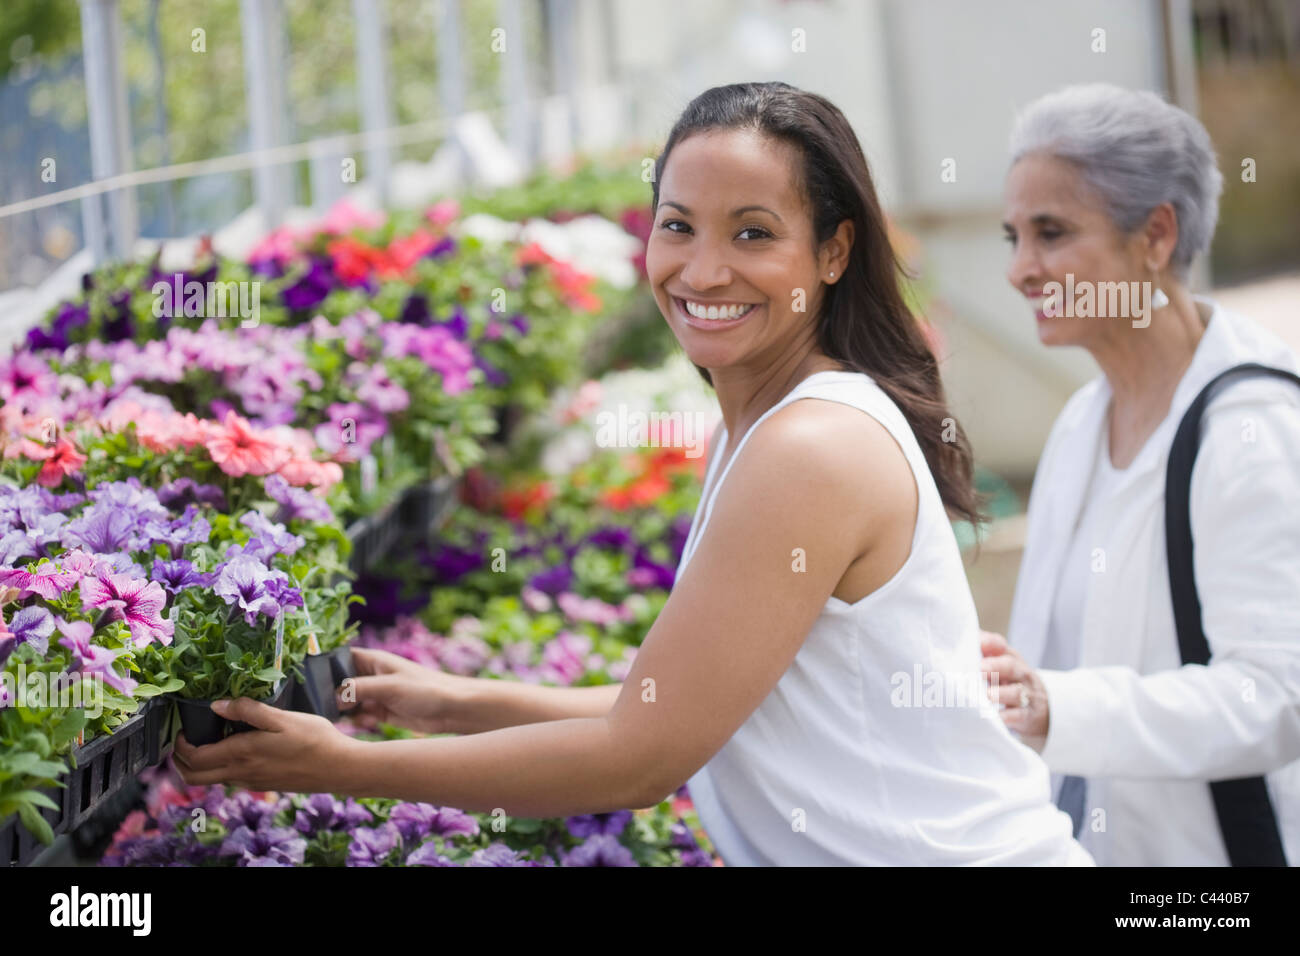 Mother and Daughter shopping together at Garden Nursery Stock Photo